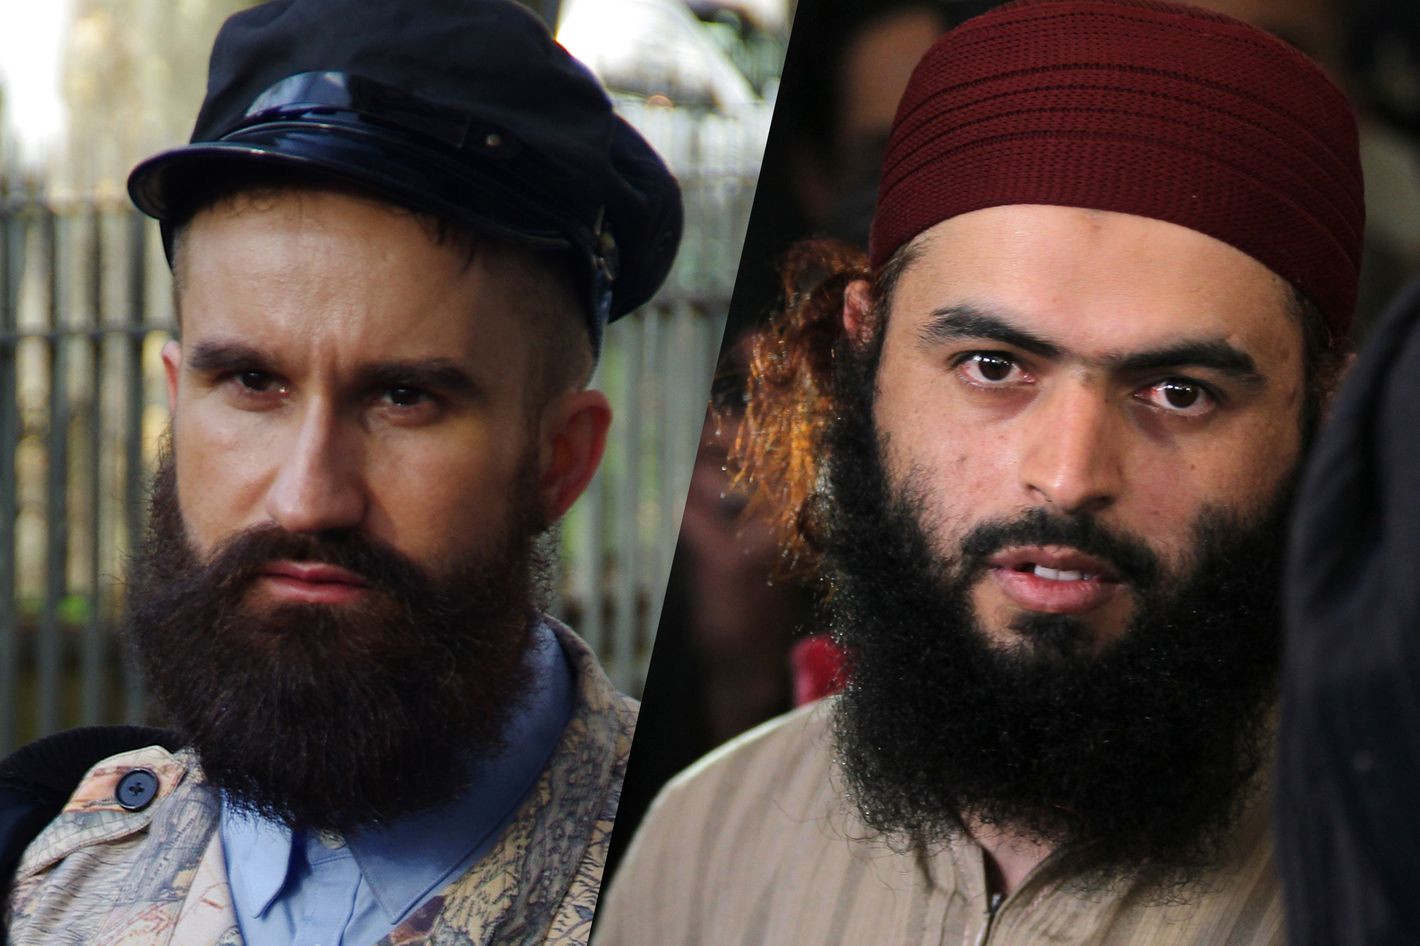 Terrorist or hipster – what does a beard mean?